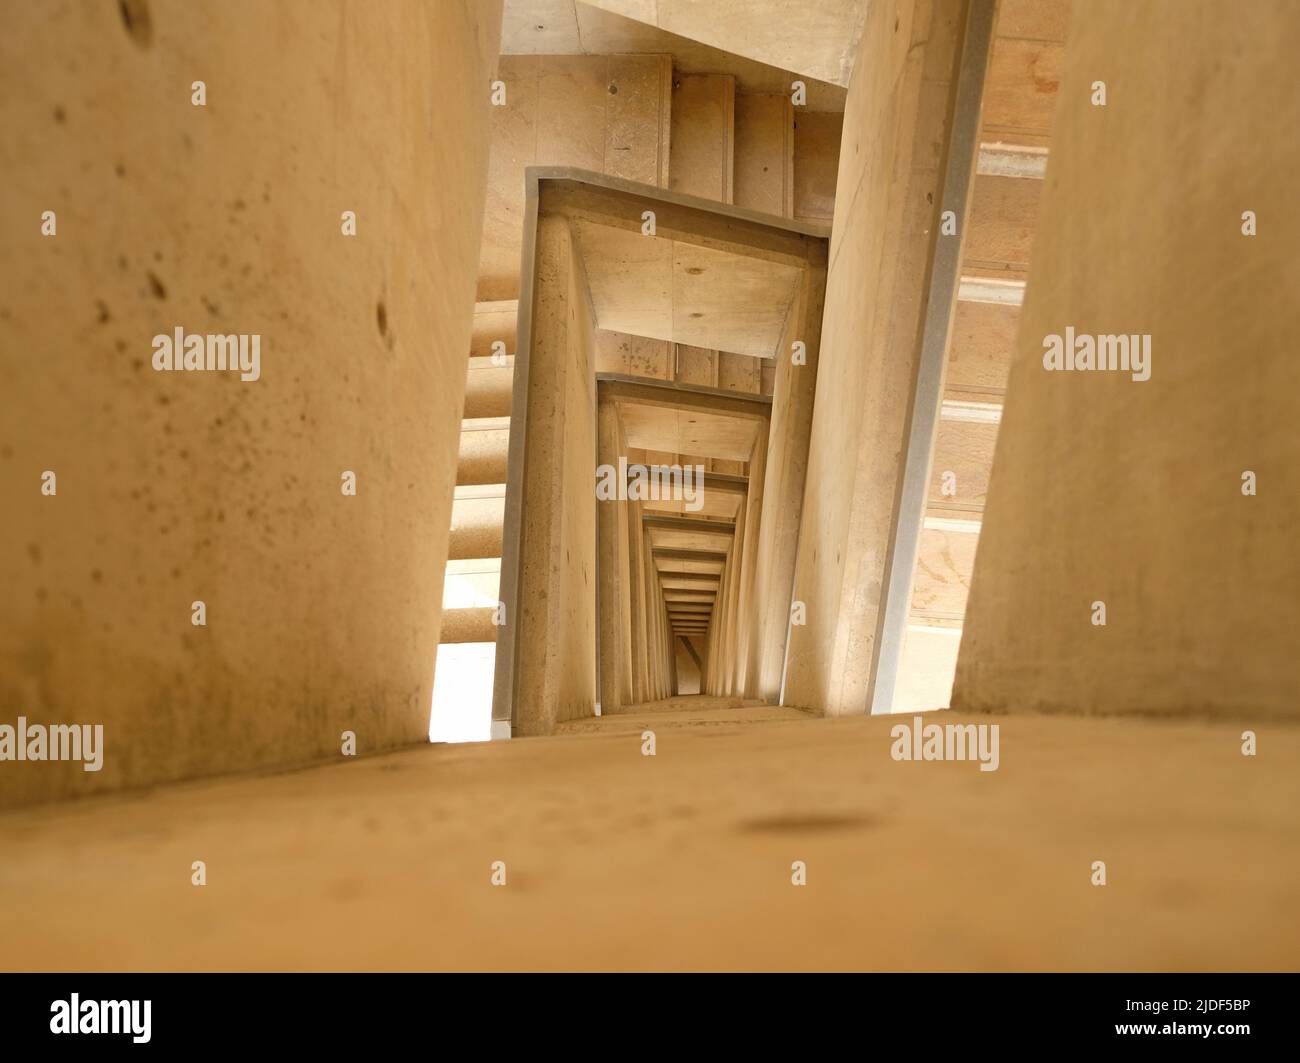 Top Down View of Stairs. Emergency Exit Concept. The winding stairs are empty. Abstract beige background. Stock Photo